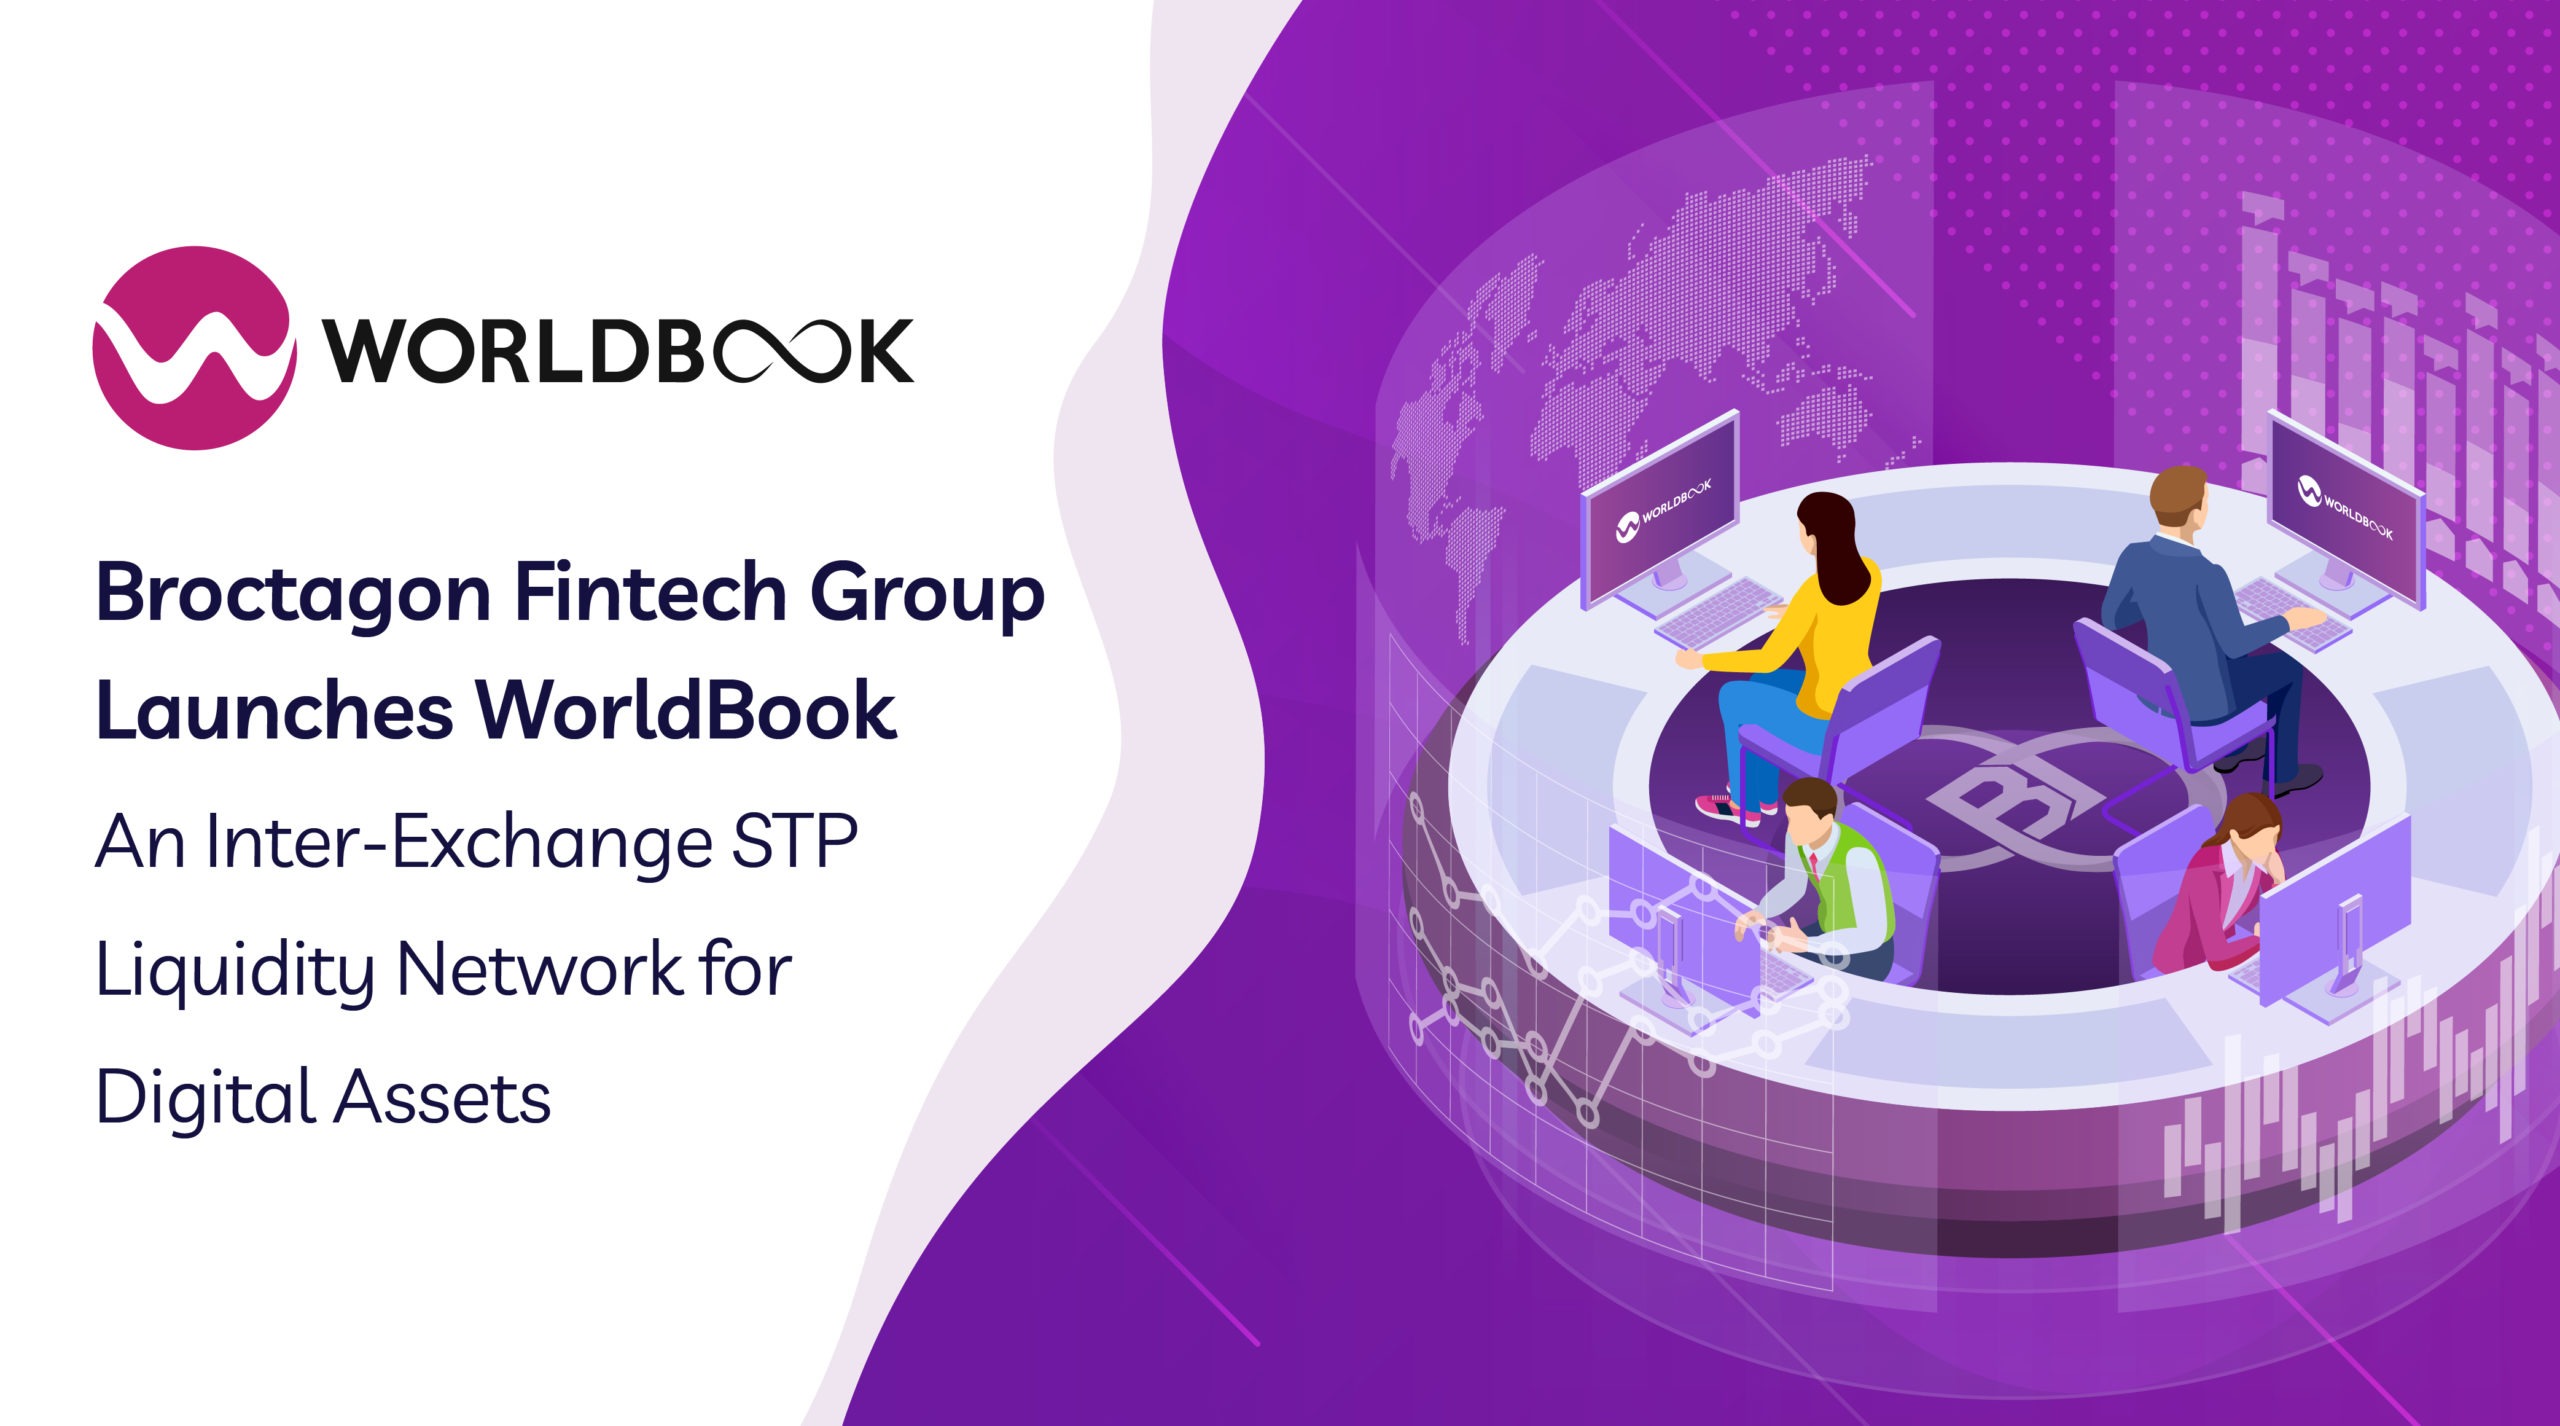 Launches Worldbook scaled